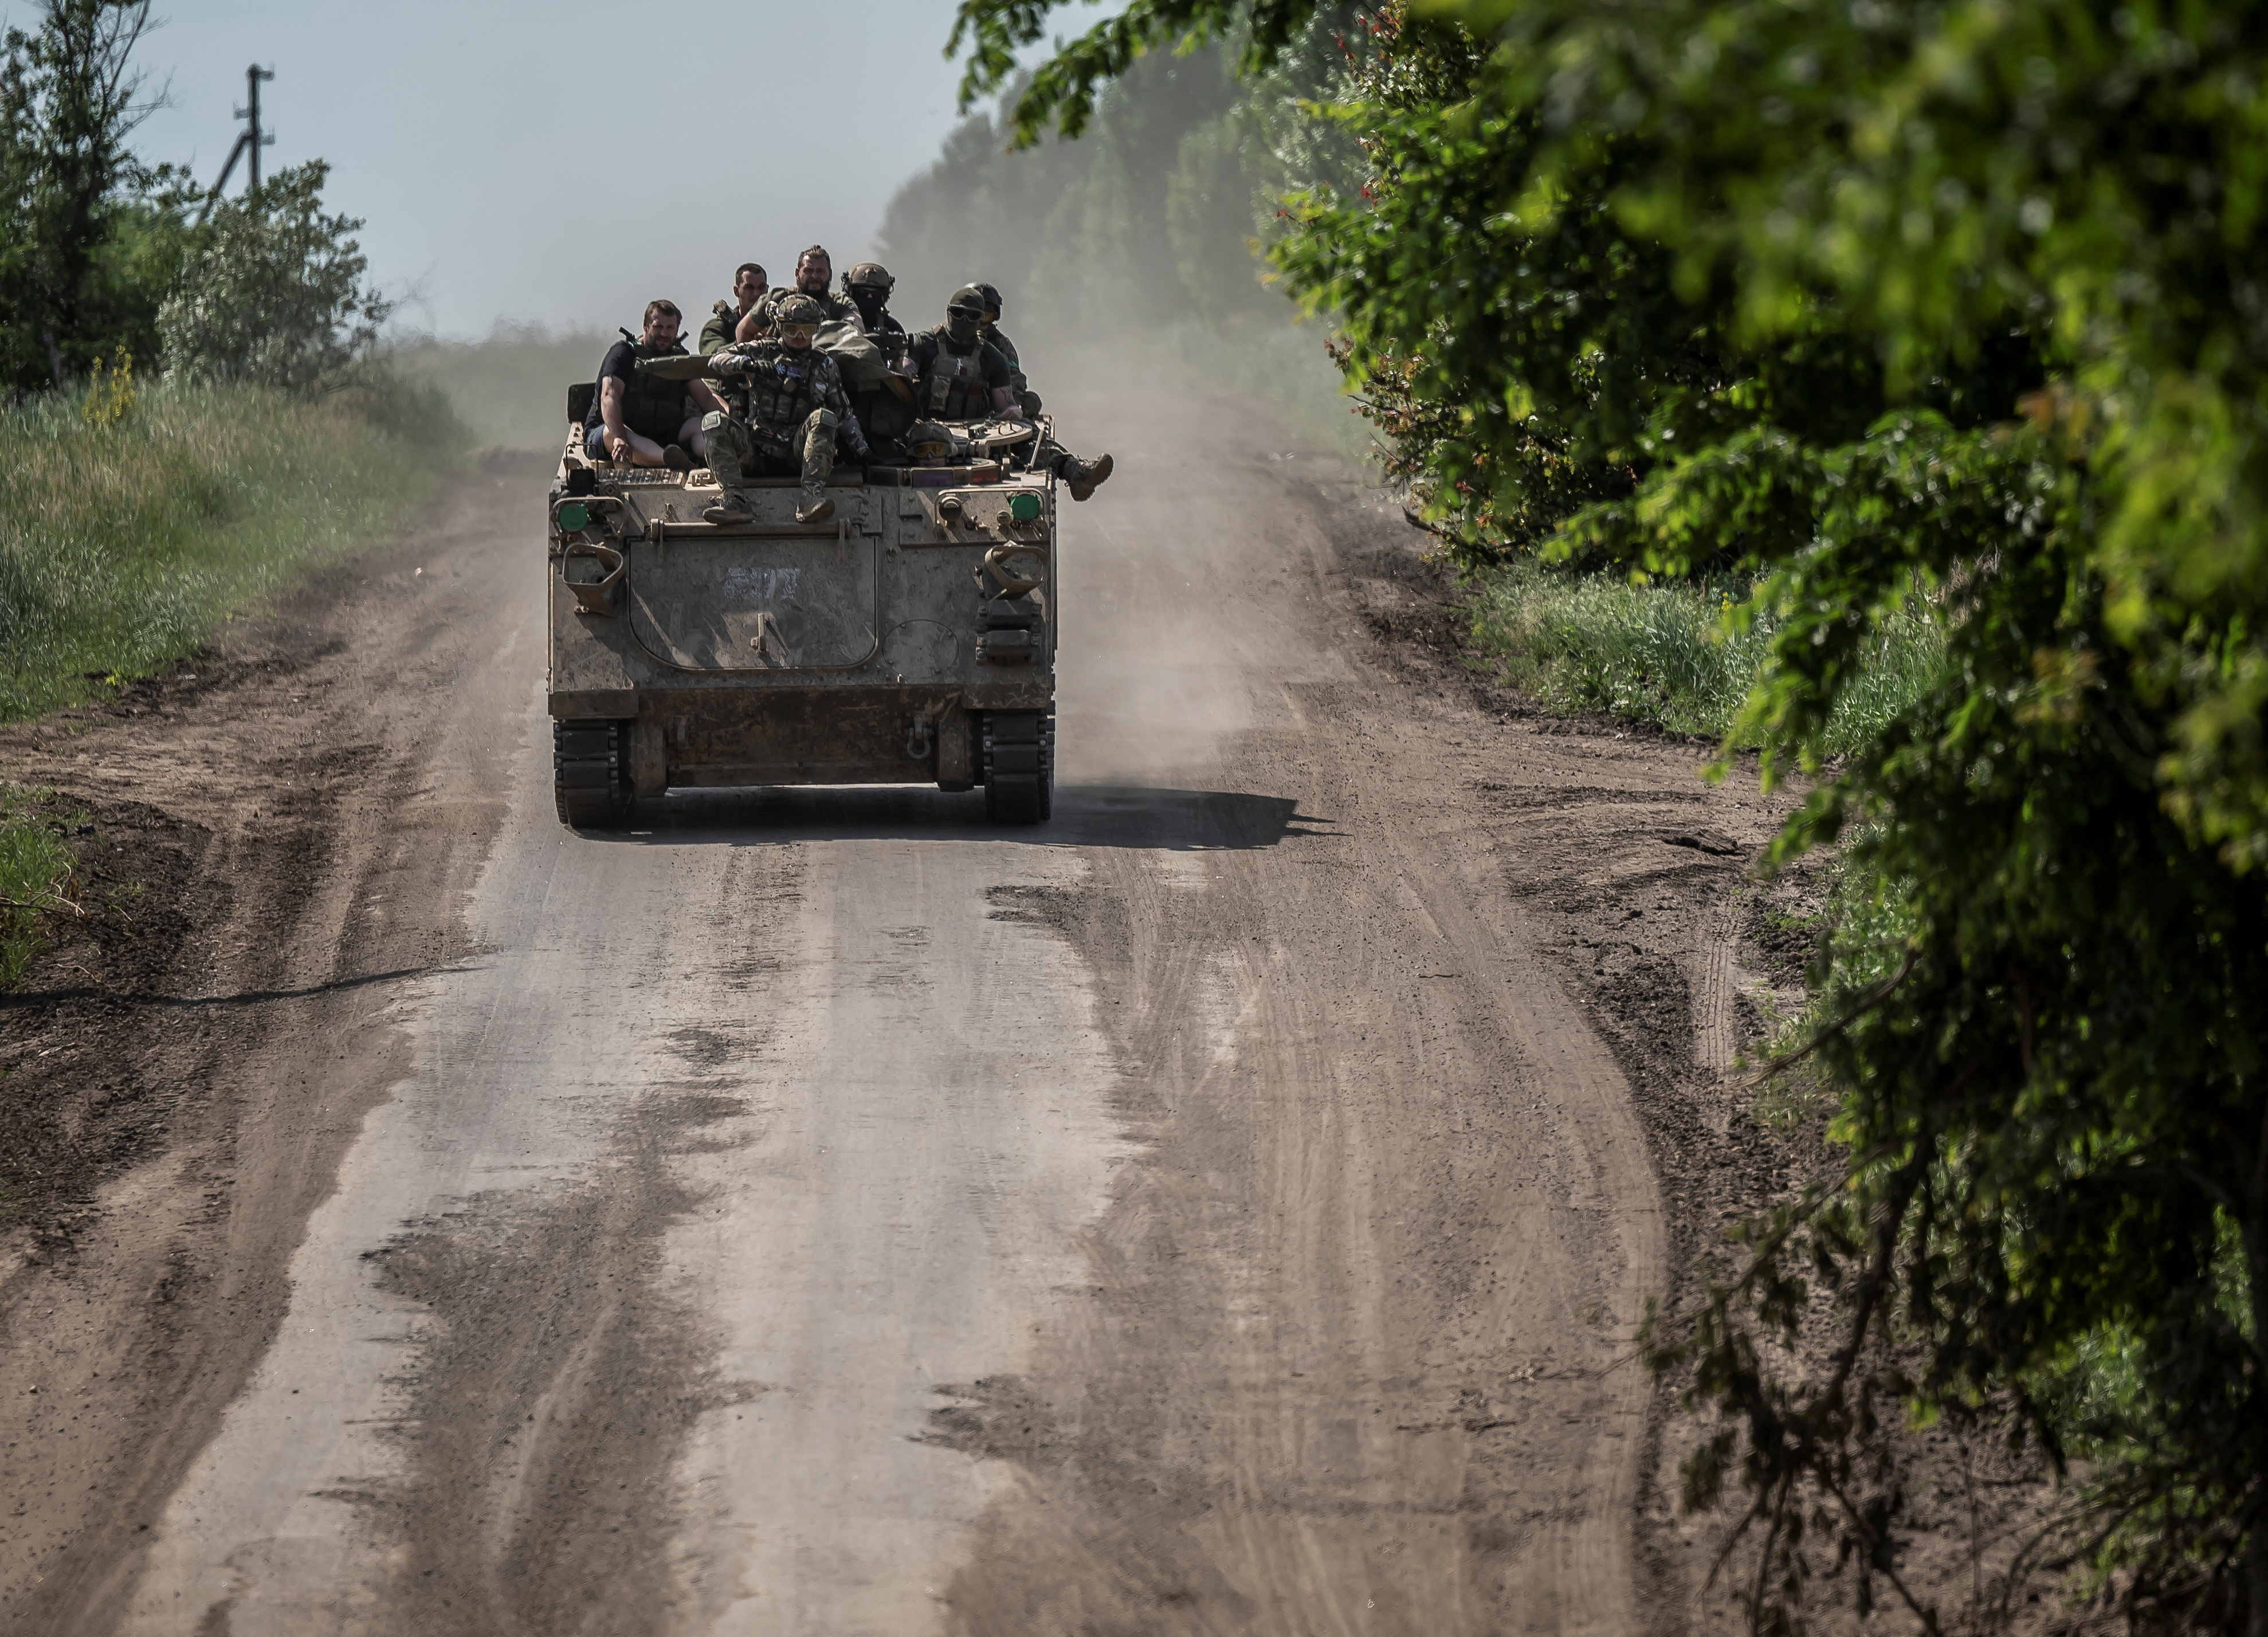 Ukrainian service members ride a M113 armoured personnel carrier near the front line city of Bakhmut